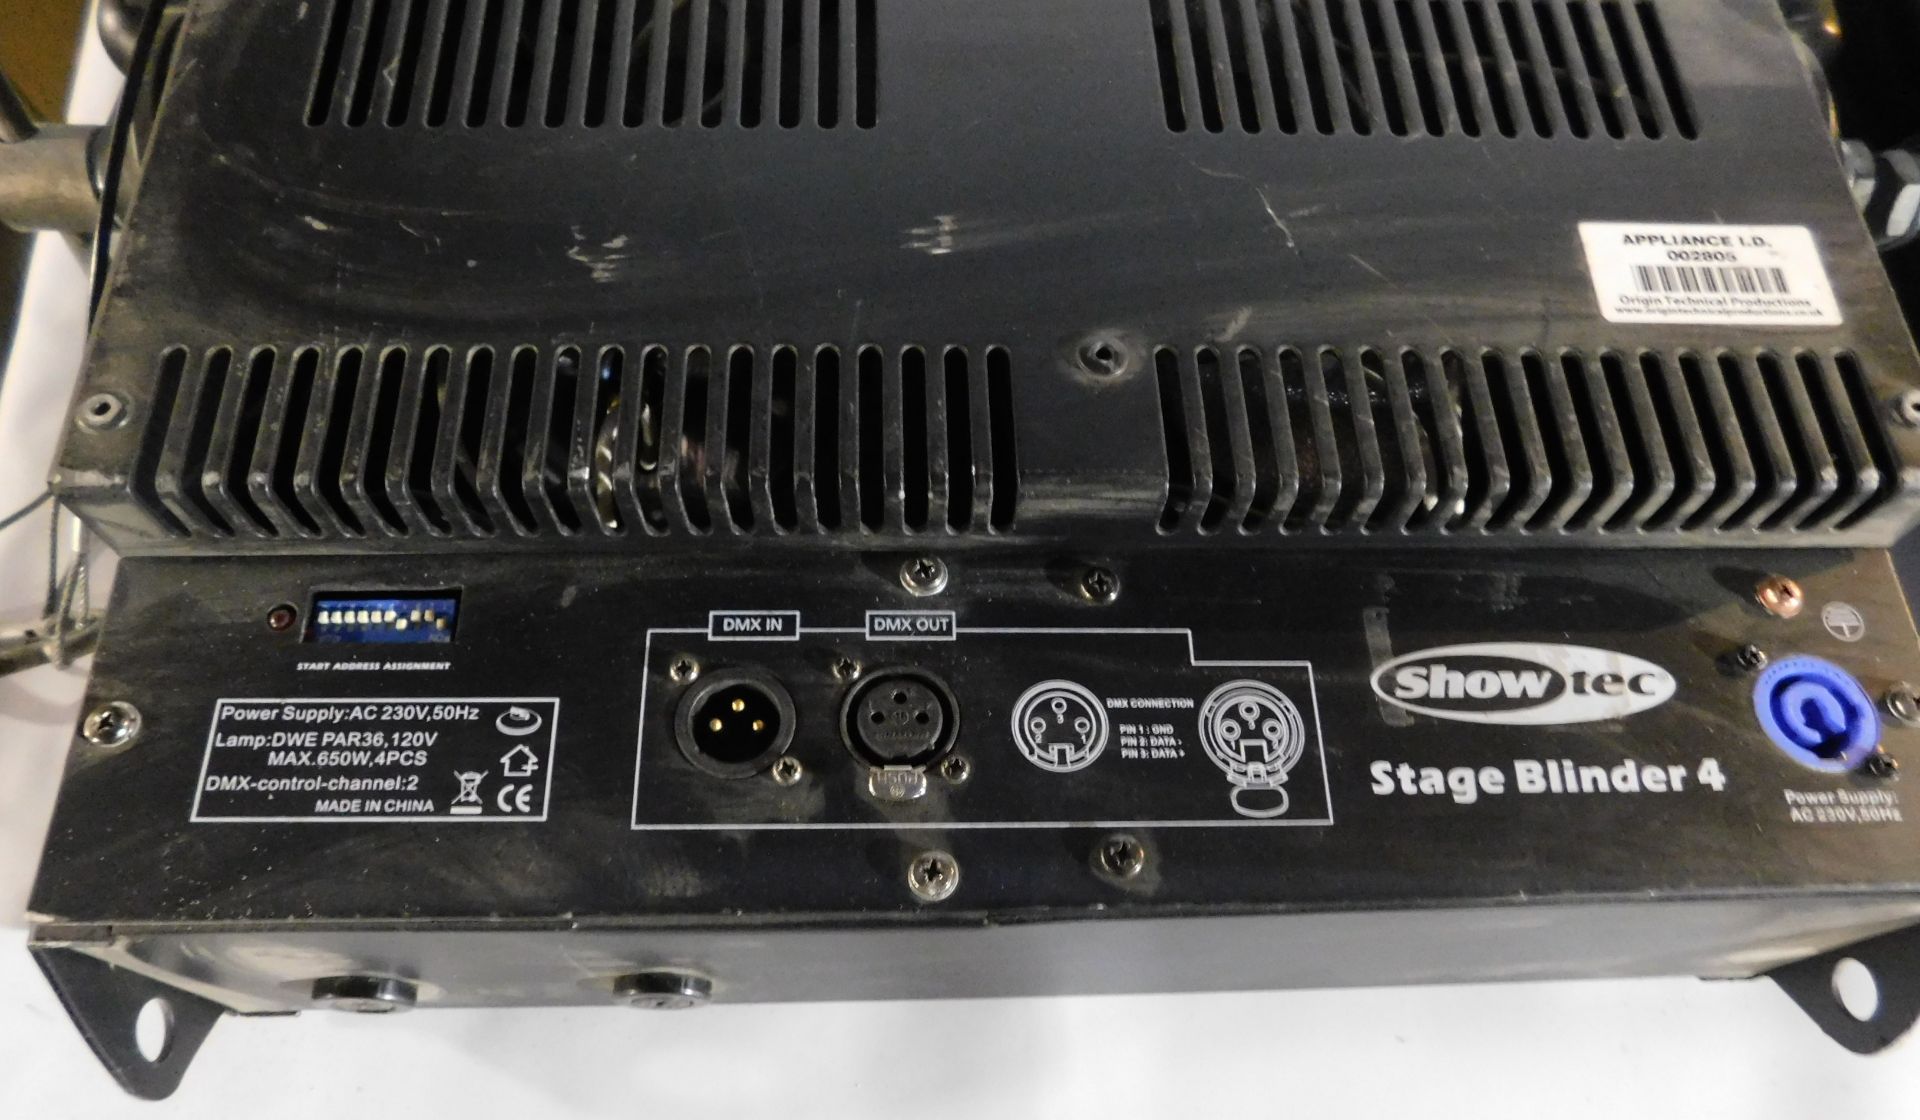 3 Showtec DMX Stager Blinder 4 (Location: Brentwood. Please Refer to General Notes) - Image 3 of 3